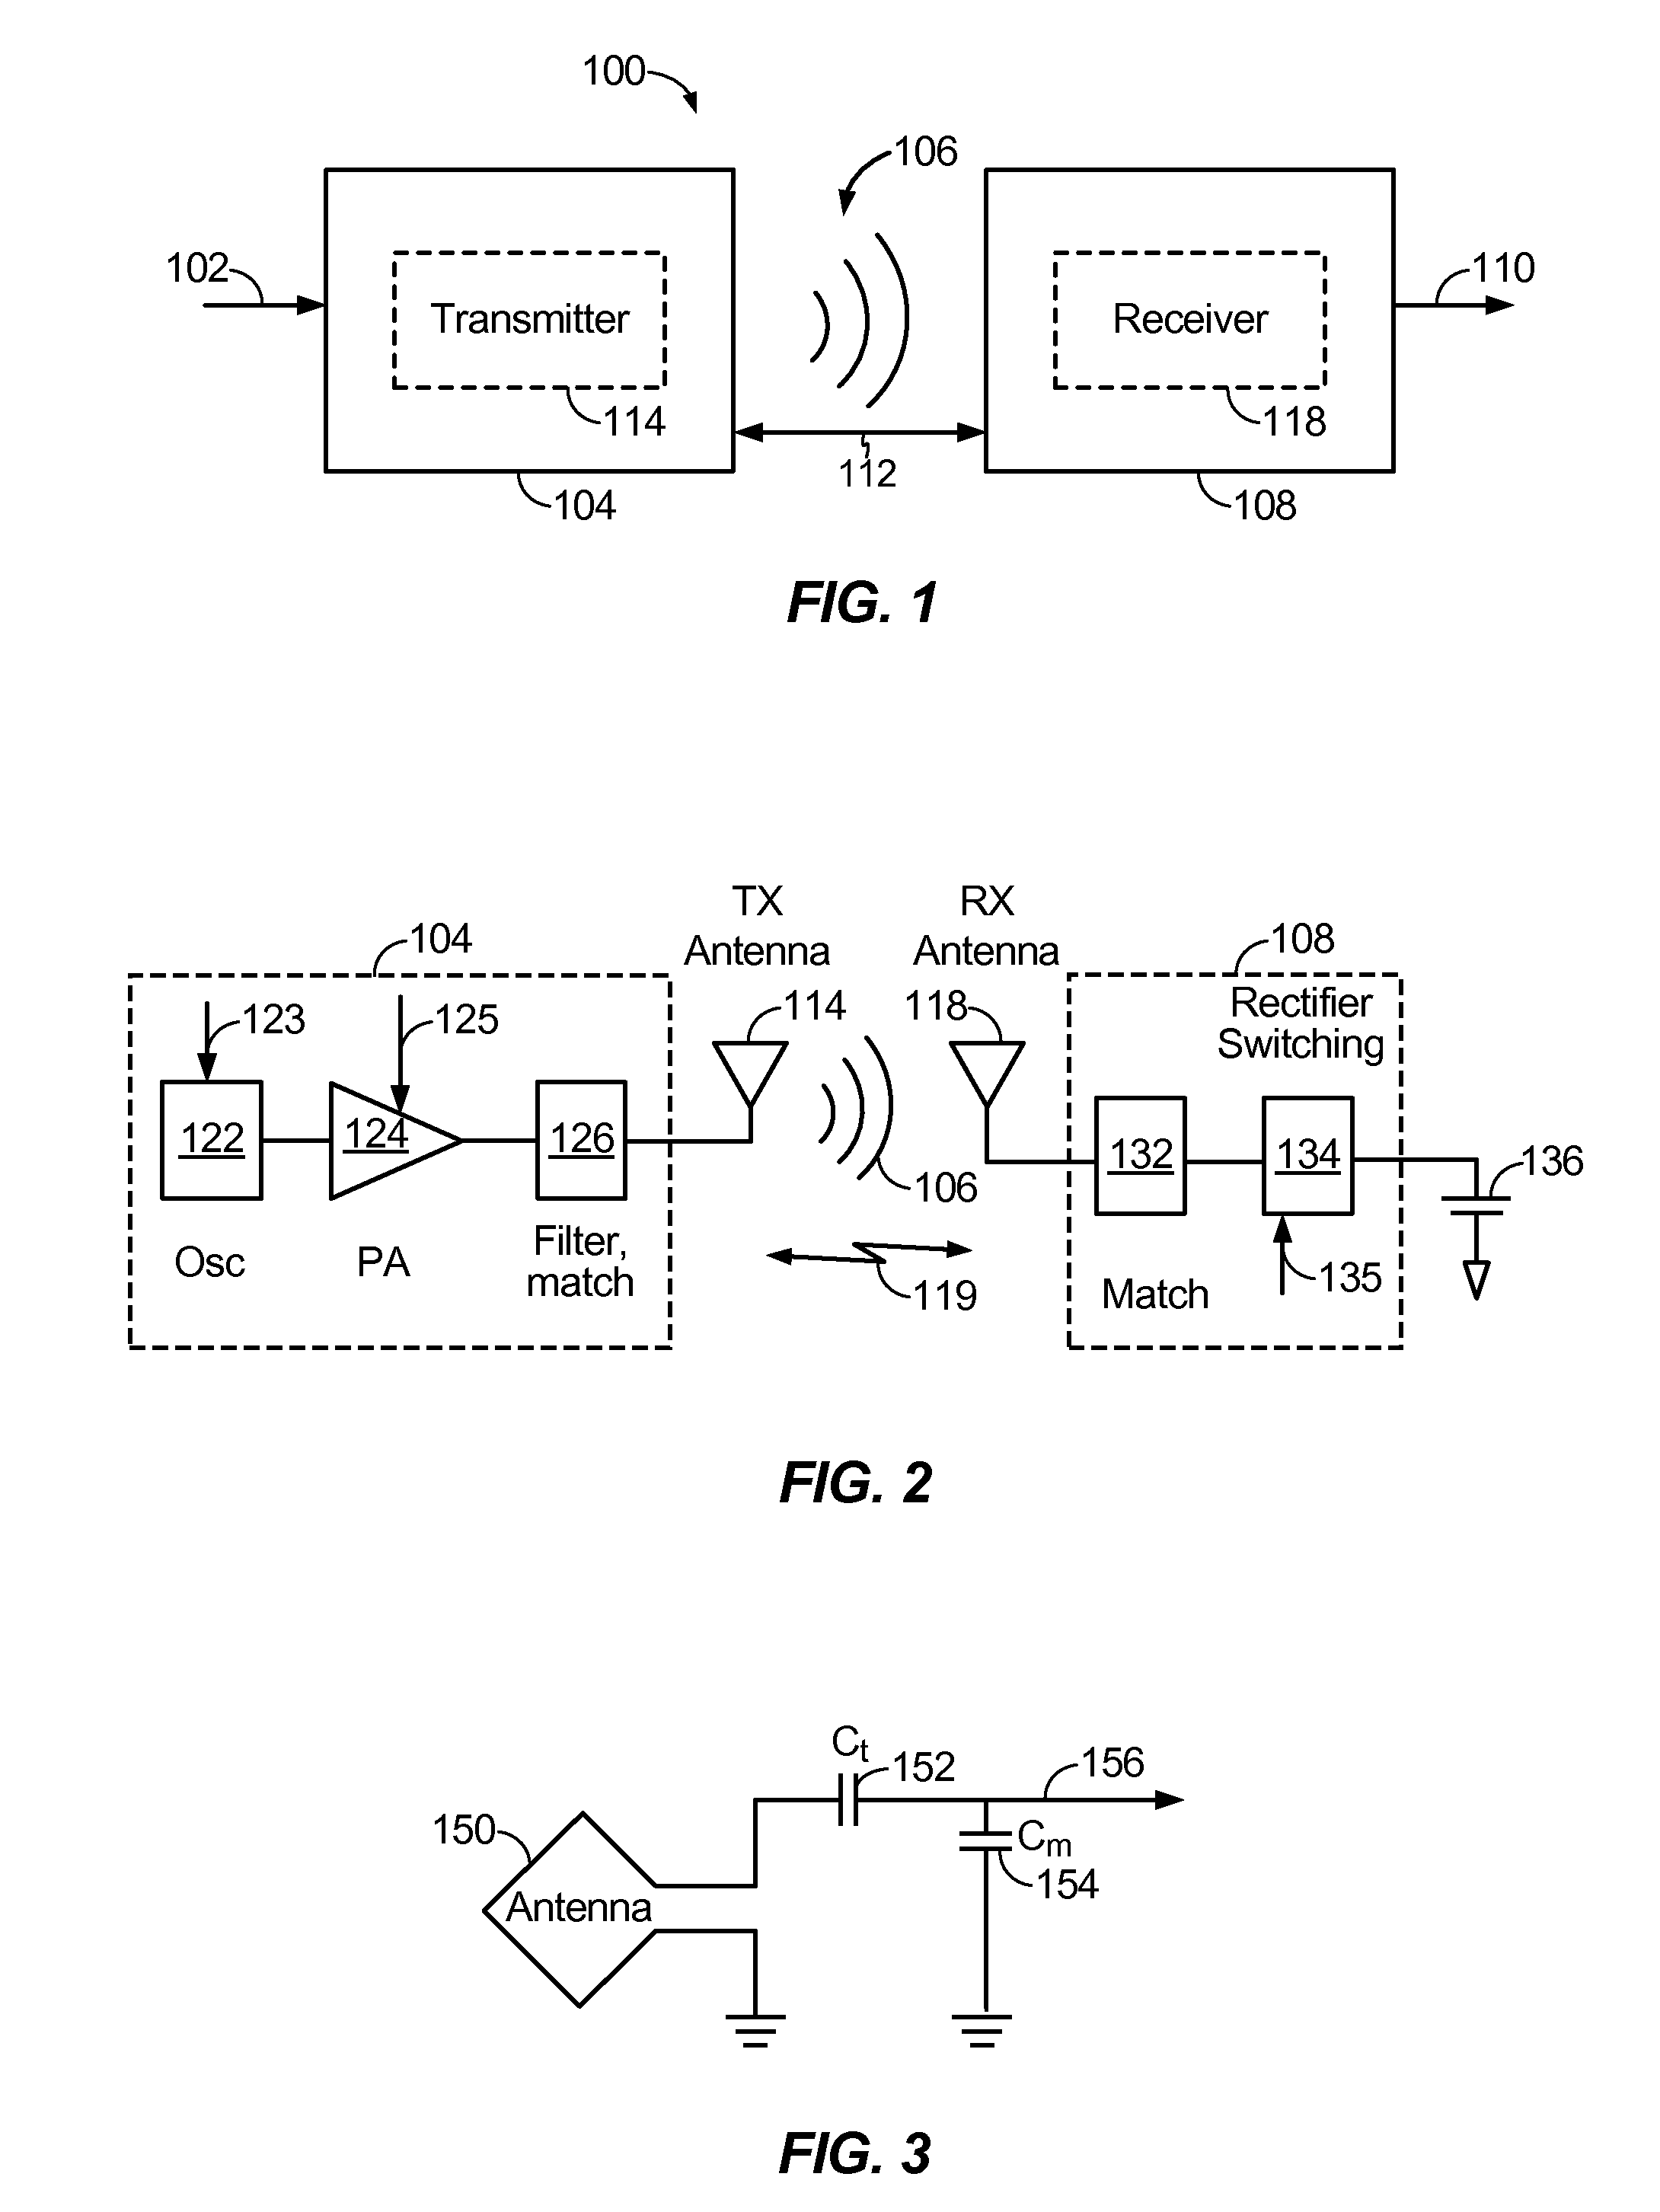 Detection and protection of devices within a wireless power system